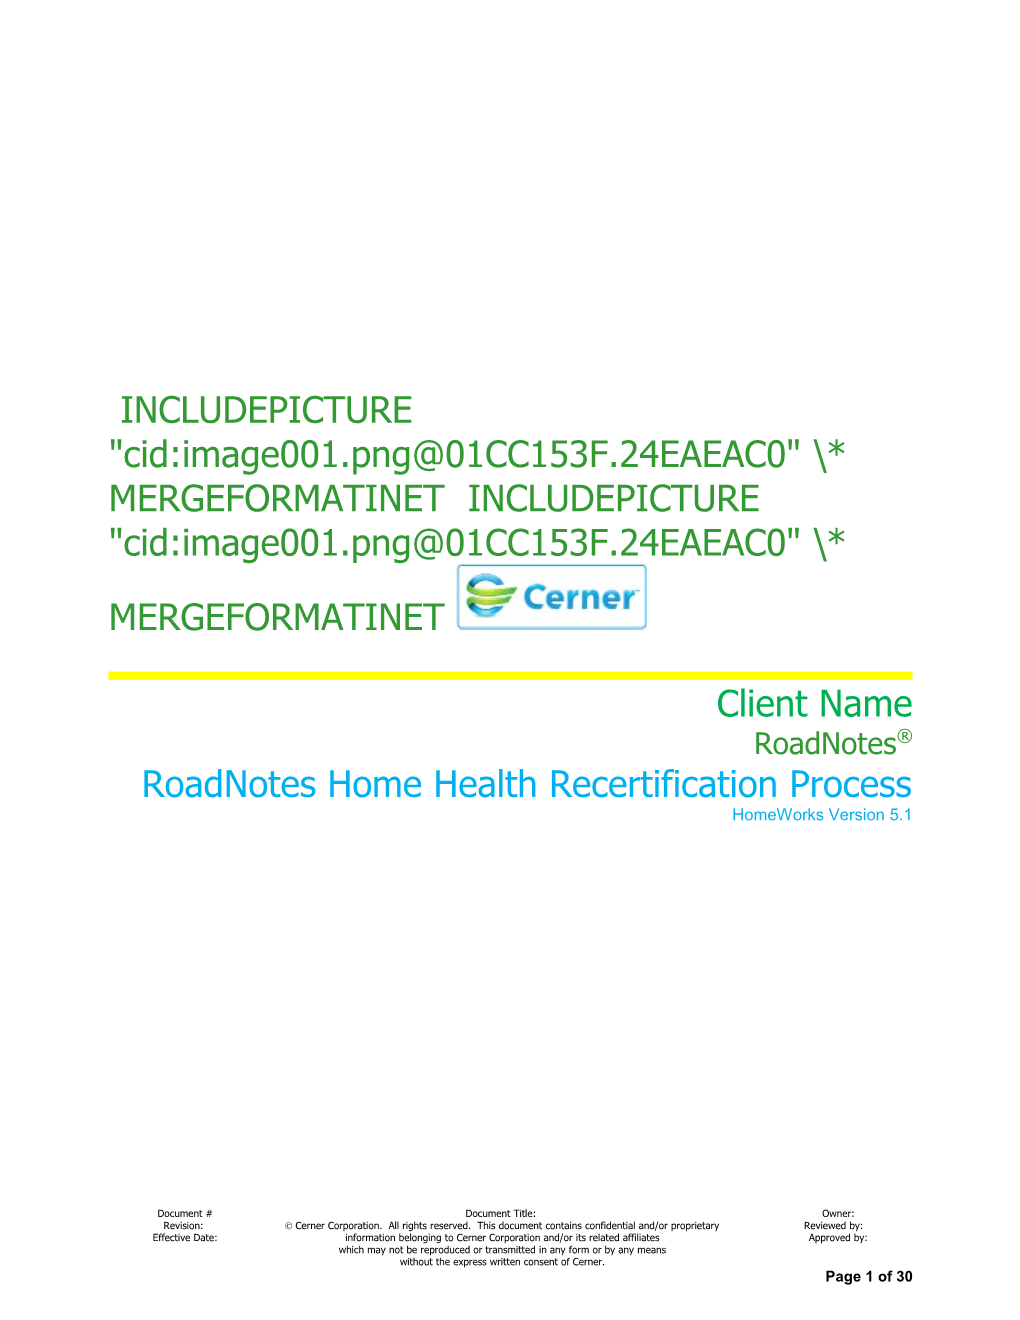 Roadnotes Home Health Recertification Process